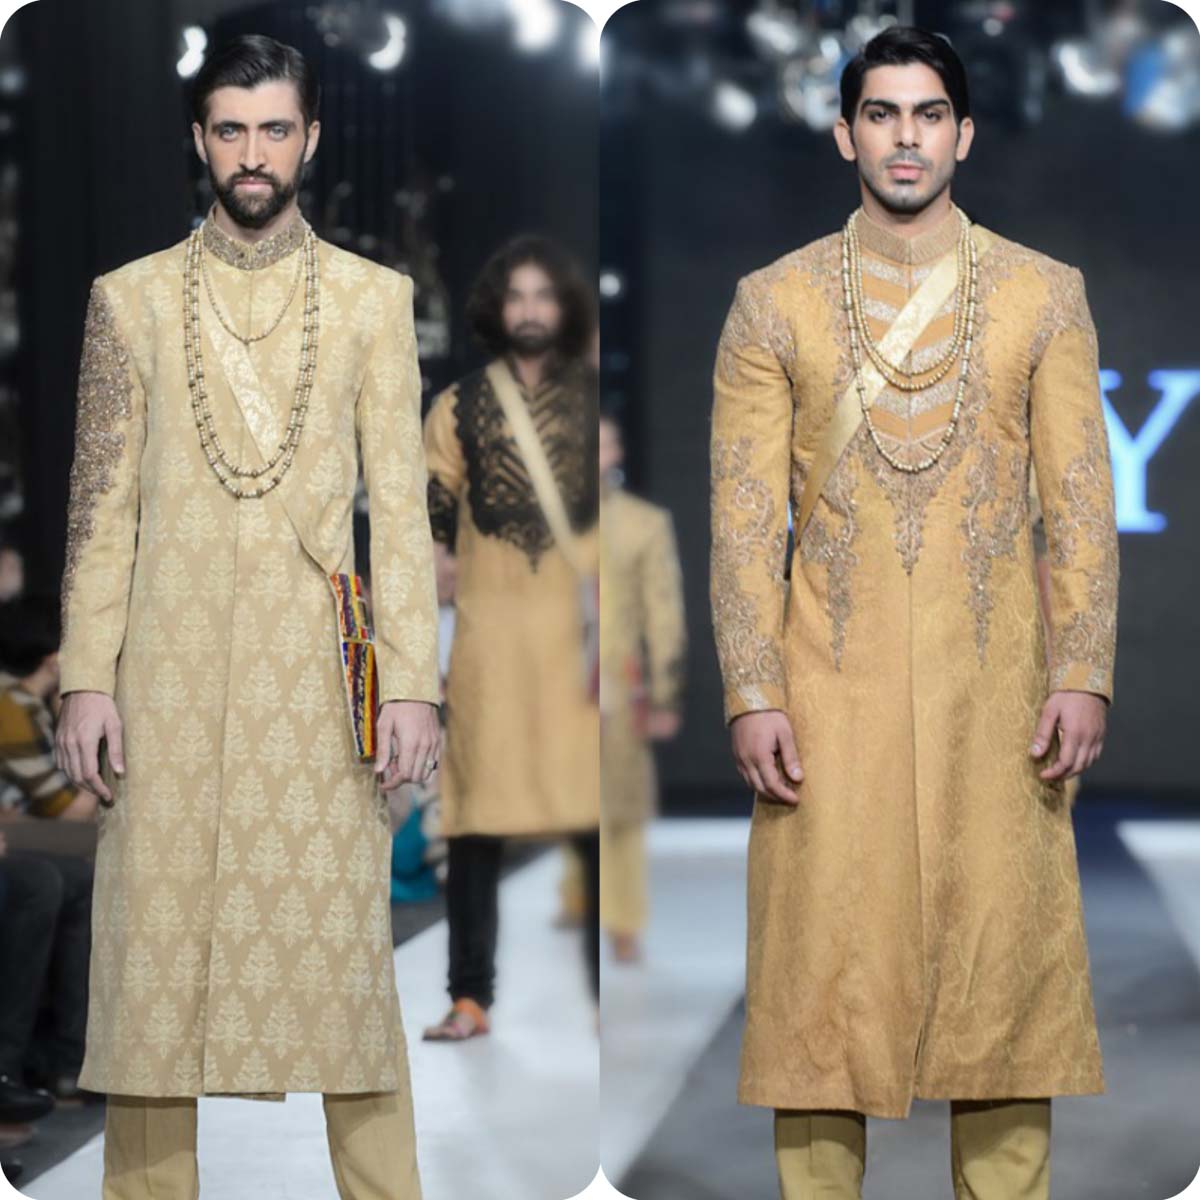 HSY has been famous for its clothes specially wedding clothes. Image of two models walking on a ramp in sherwanis.